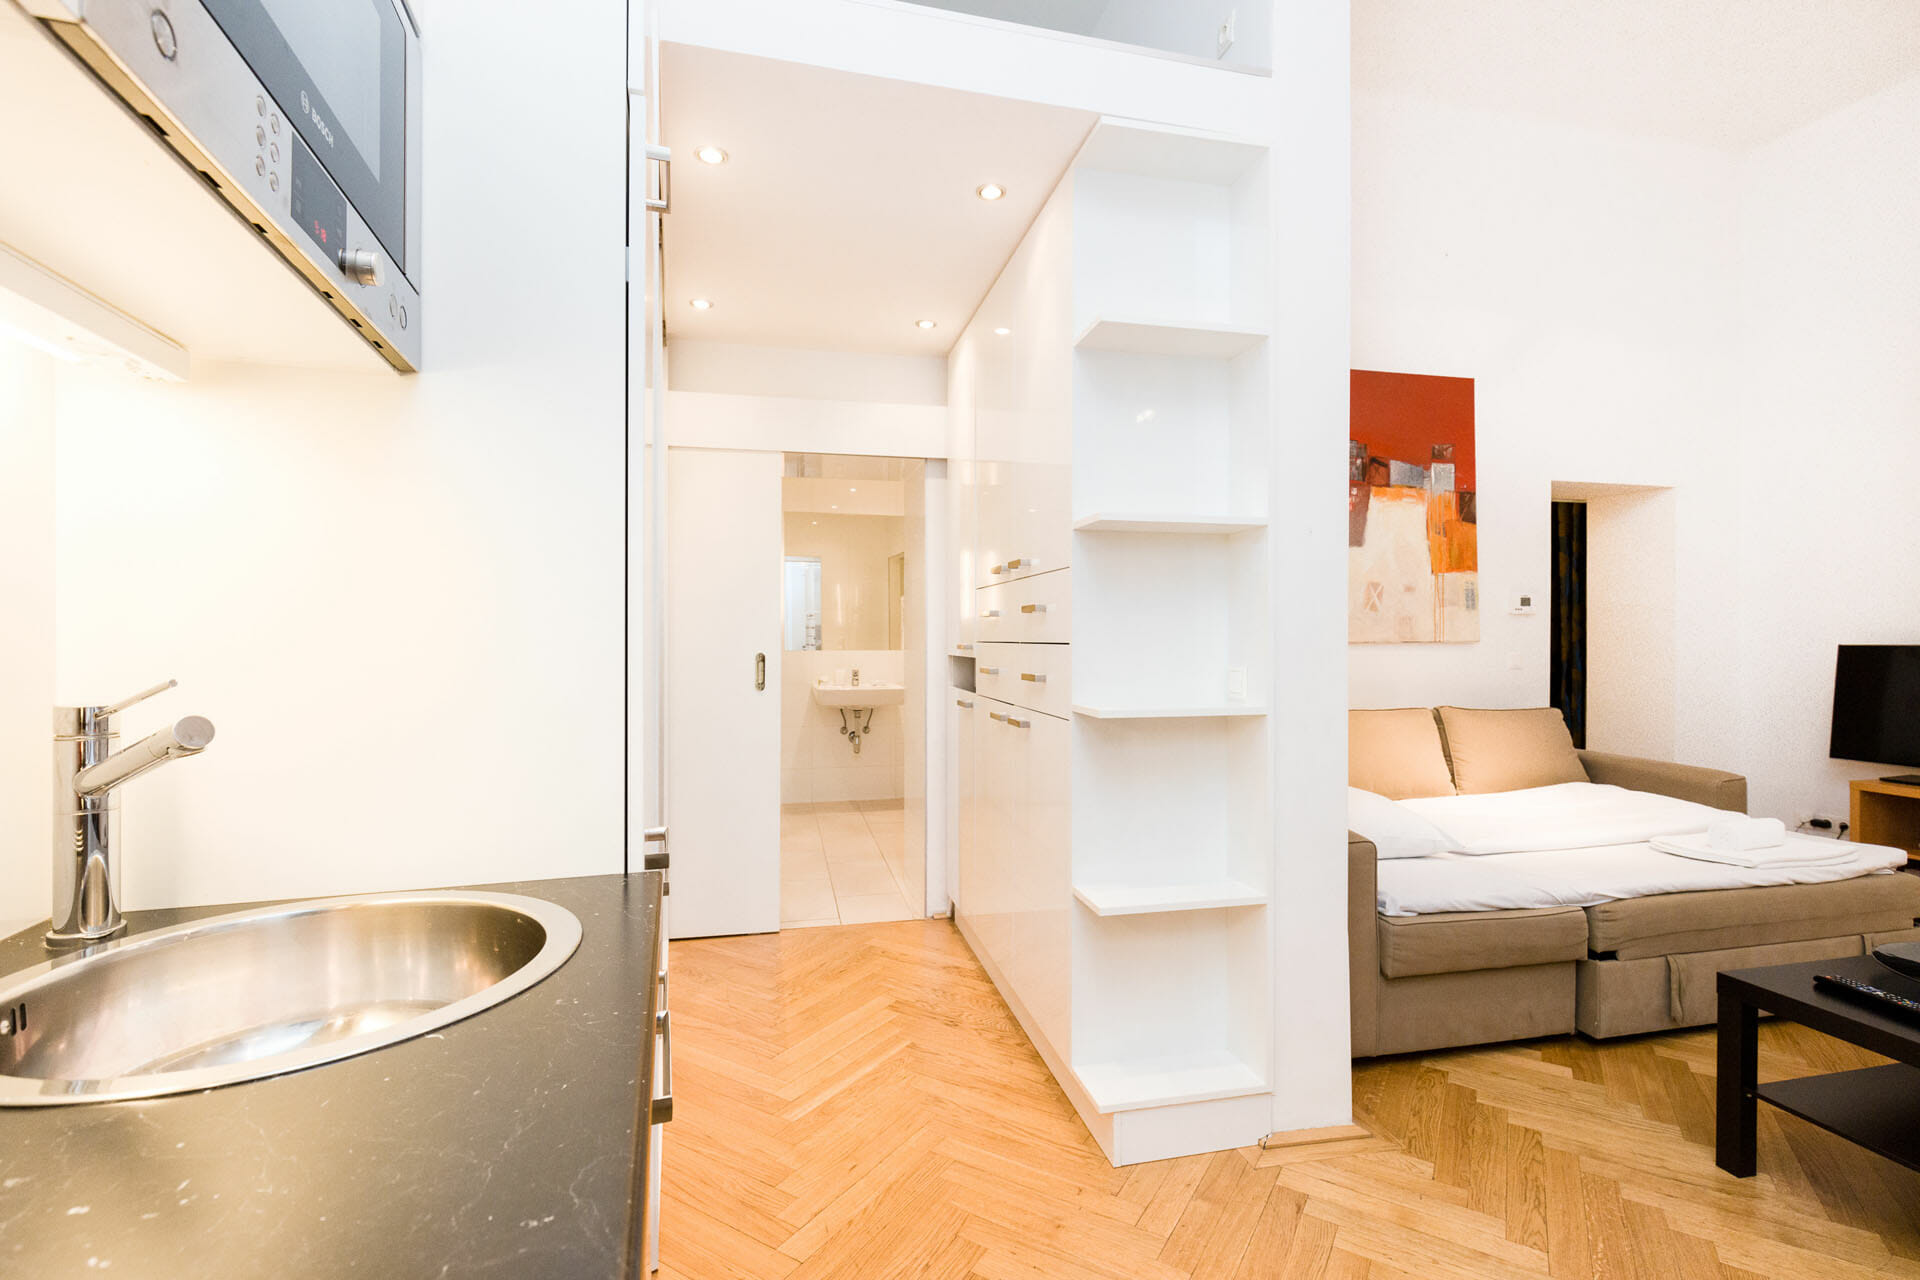 Prestige Apartments in Vienna Austria.Luxury Apartment in Vienna's City Center.Graben 28. , 2 minutes walking distance to the Stephans Cathedral, Kaerntnerstrasse and Kohlmarkt (famous shopping street). 